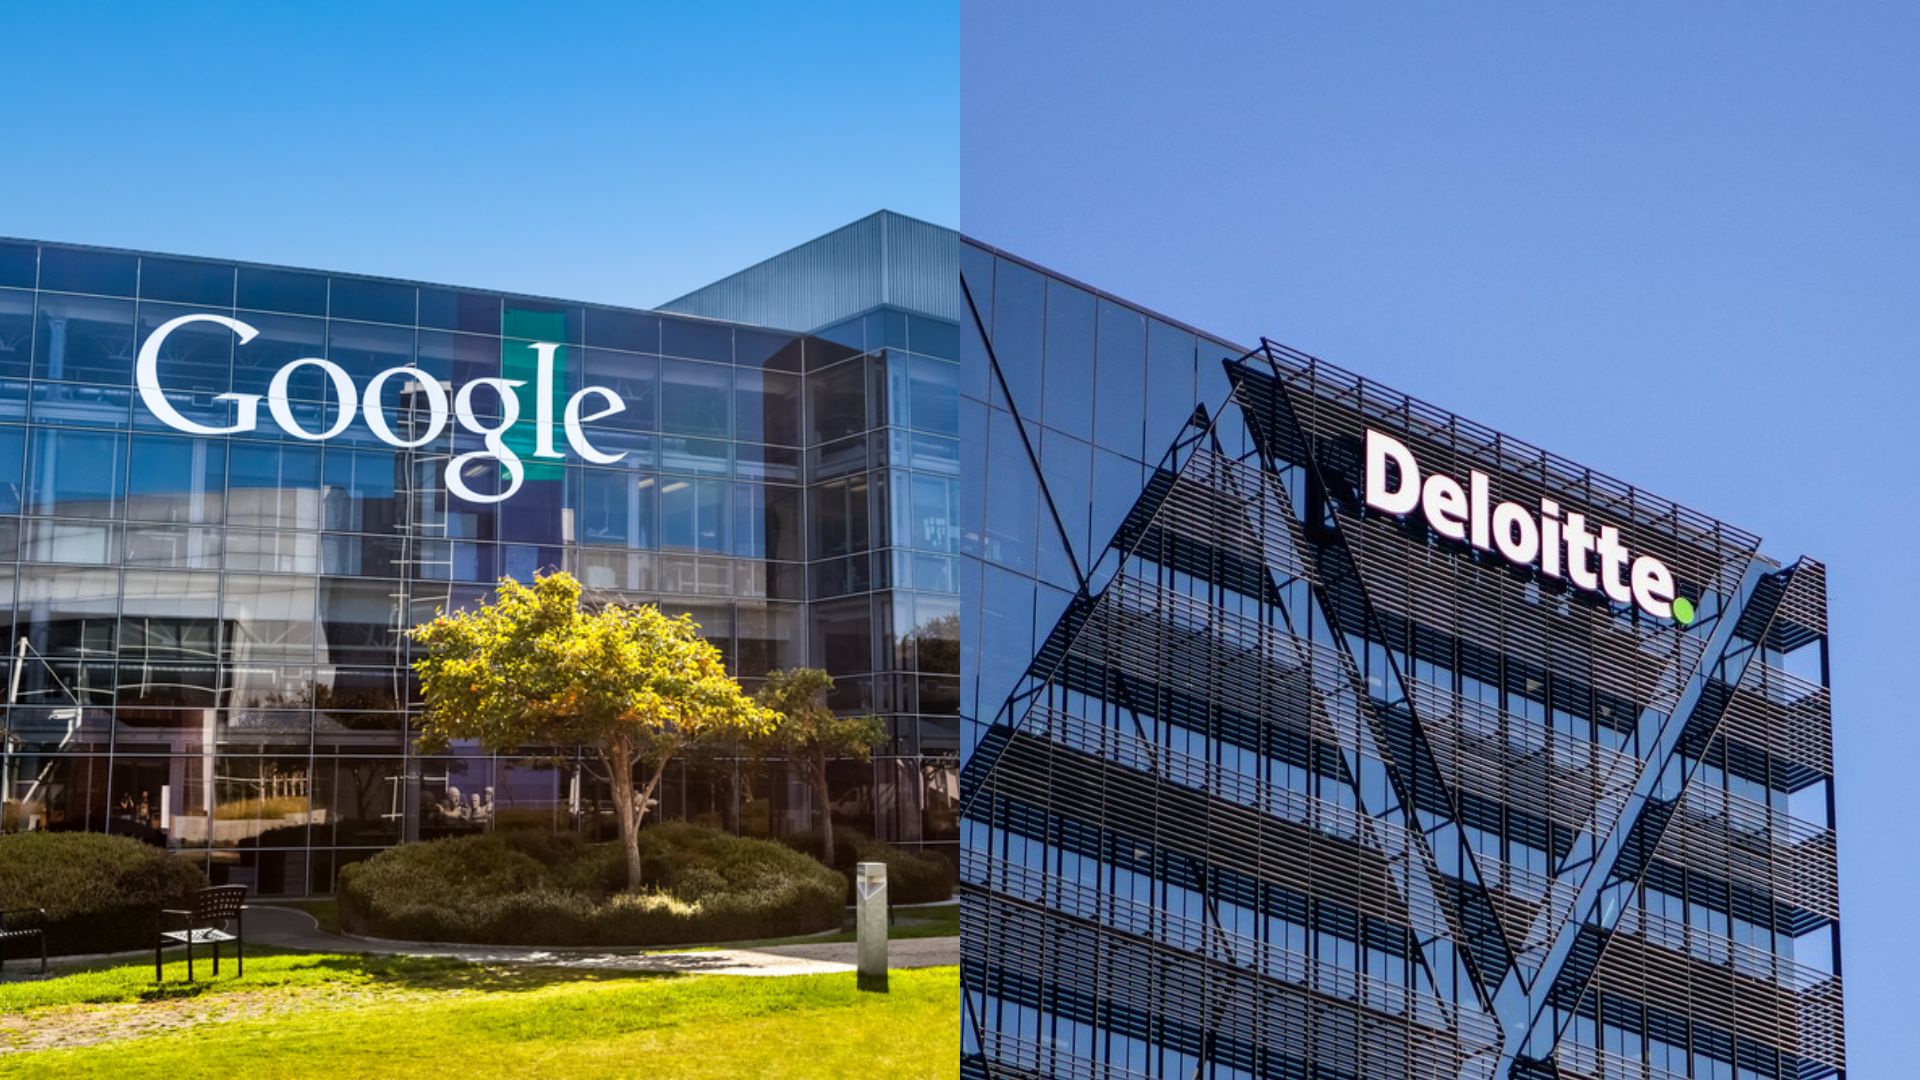 Google and Deloitte are driving climate protection with digital solutions